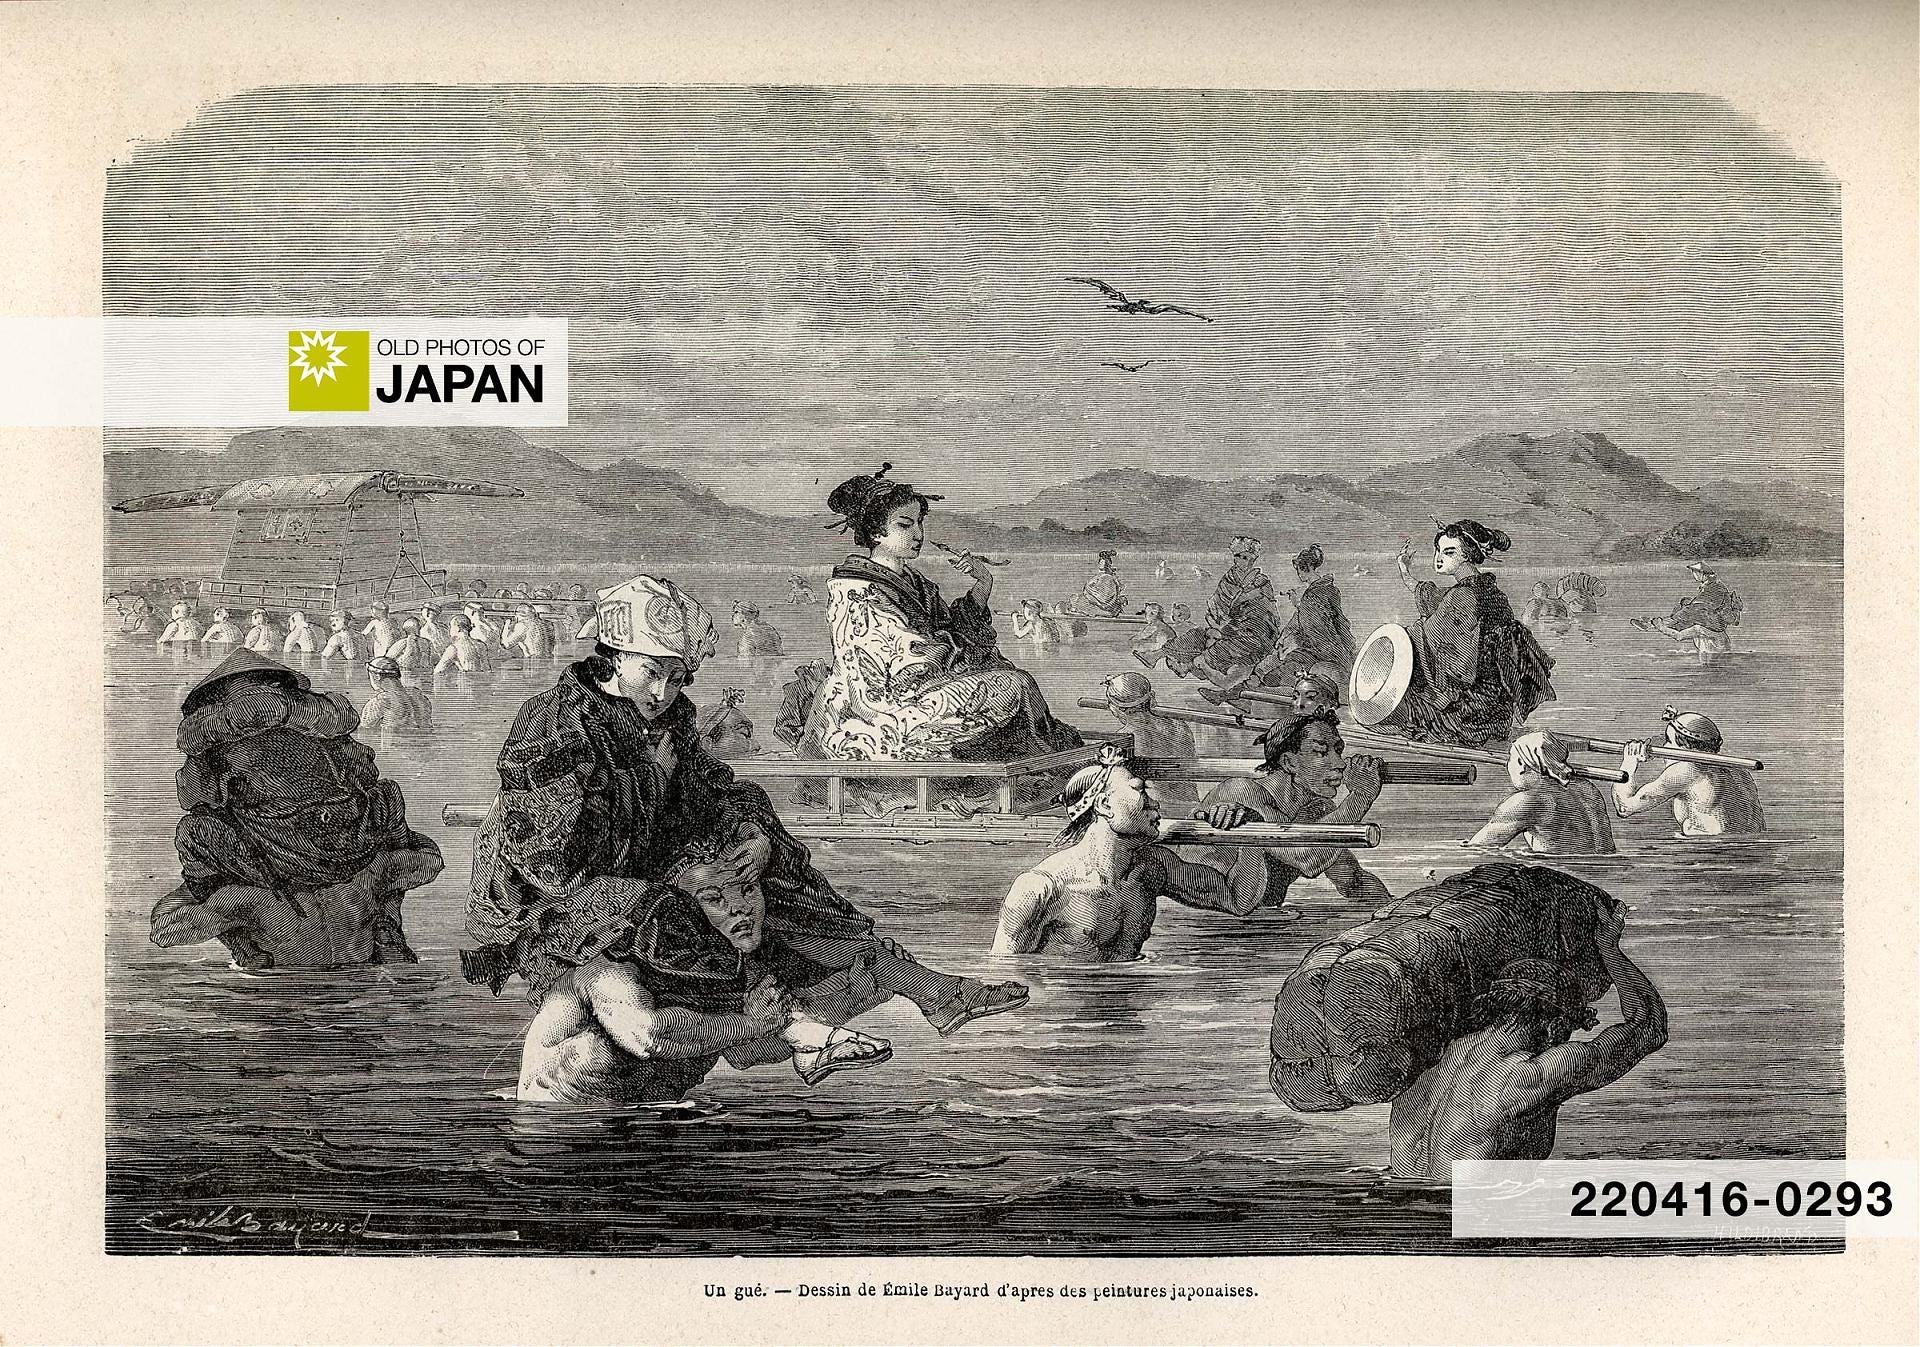 Japanese porters carrying travelers across a wide river, 1860s